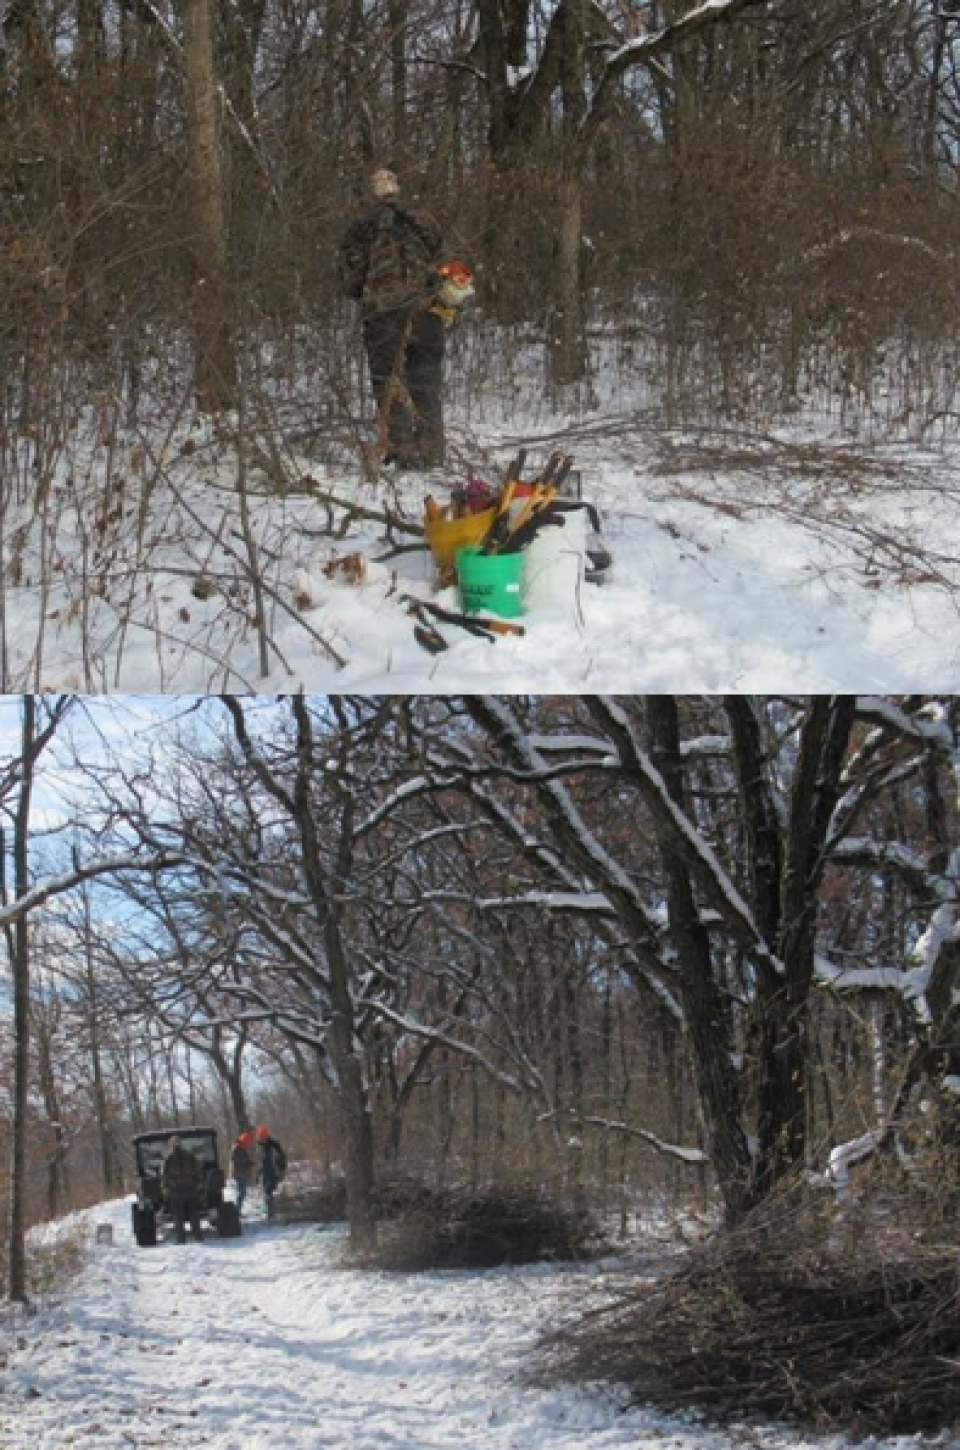 Two photos of buckthorn management